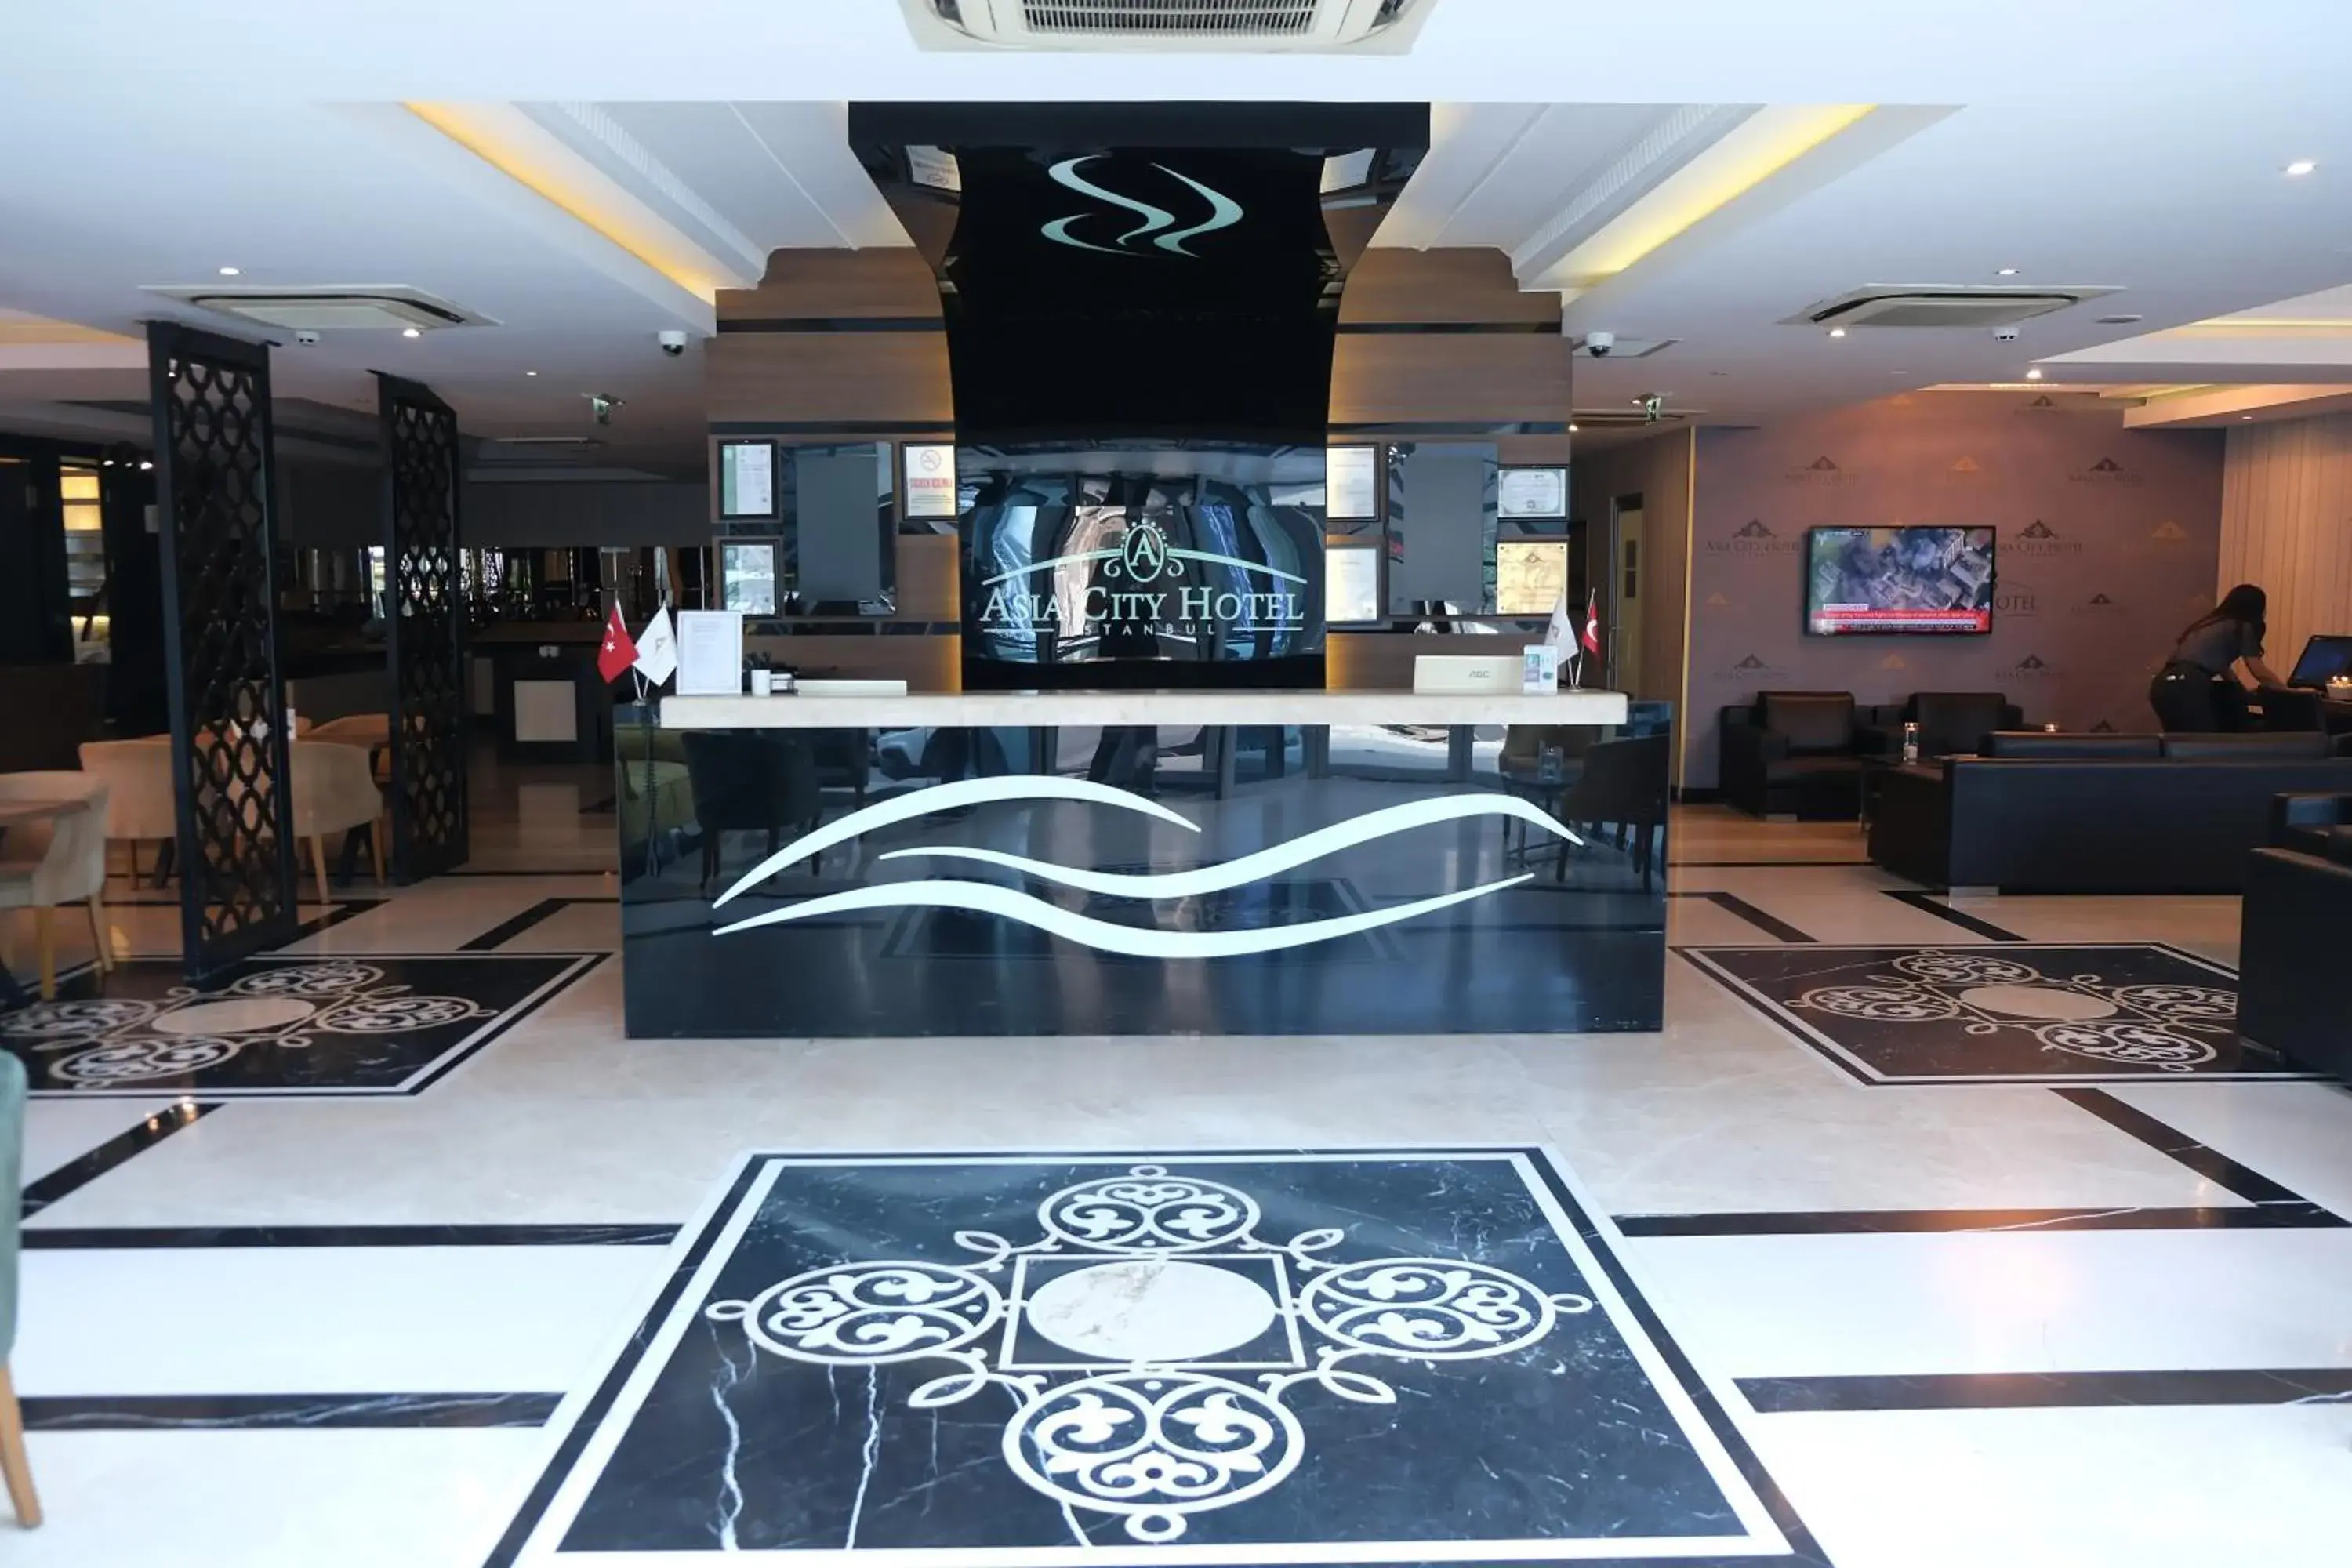 TV and multimedia, Lobby/Reception in Asia City Hotel